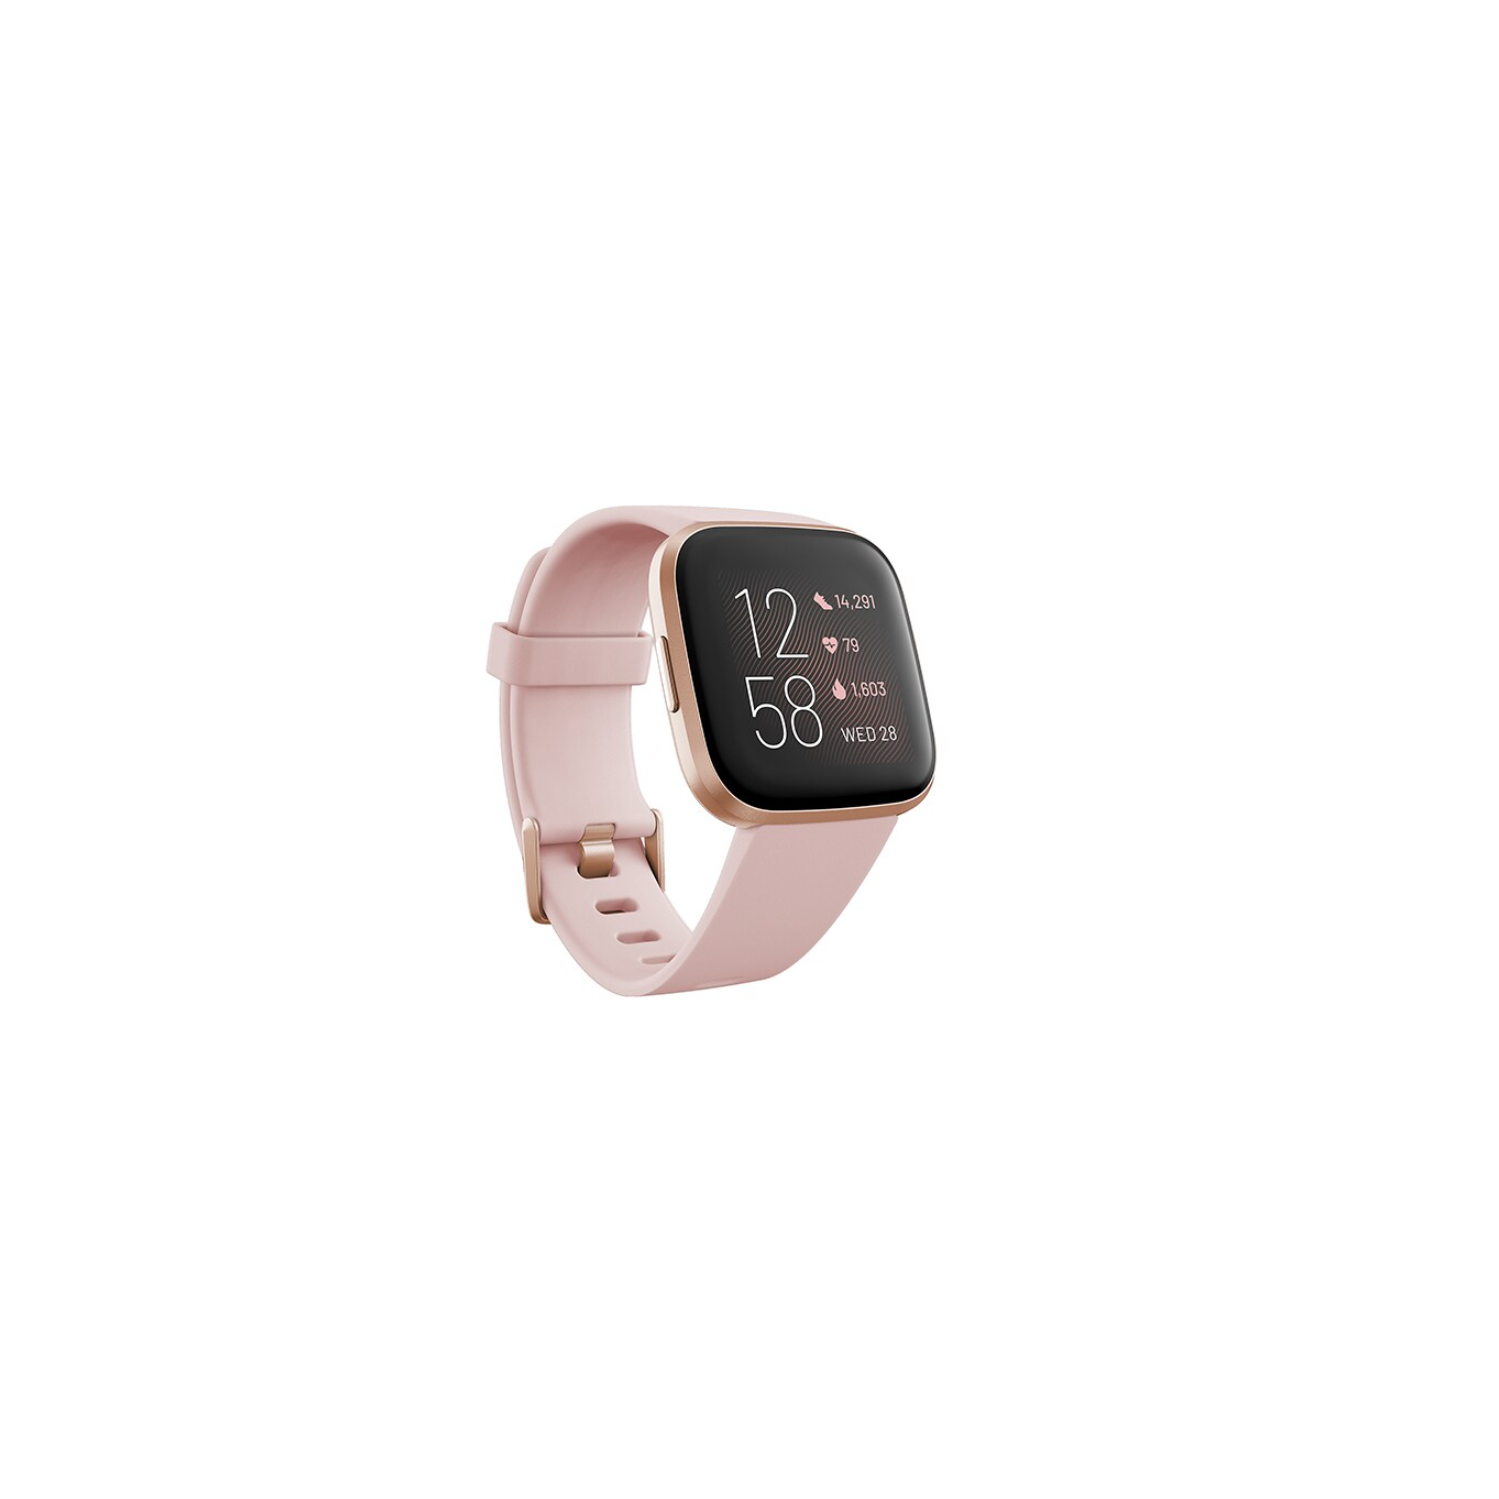 Brand New- Fitbit Versa 2 Health and Fitness Smartwatch (Petal/Copper Rose)